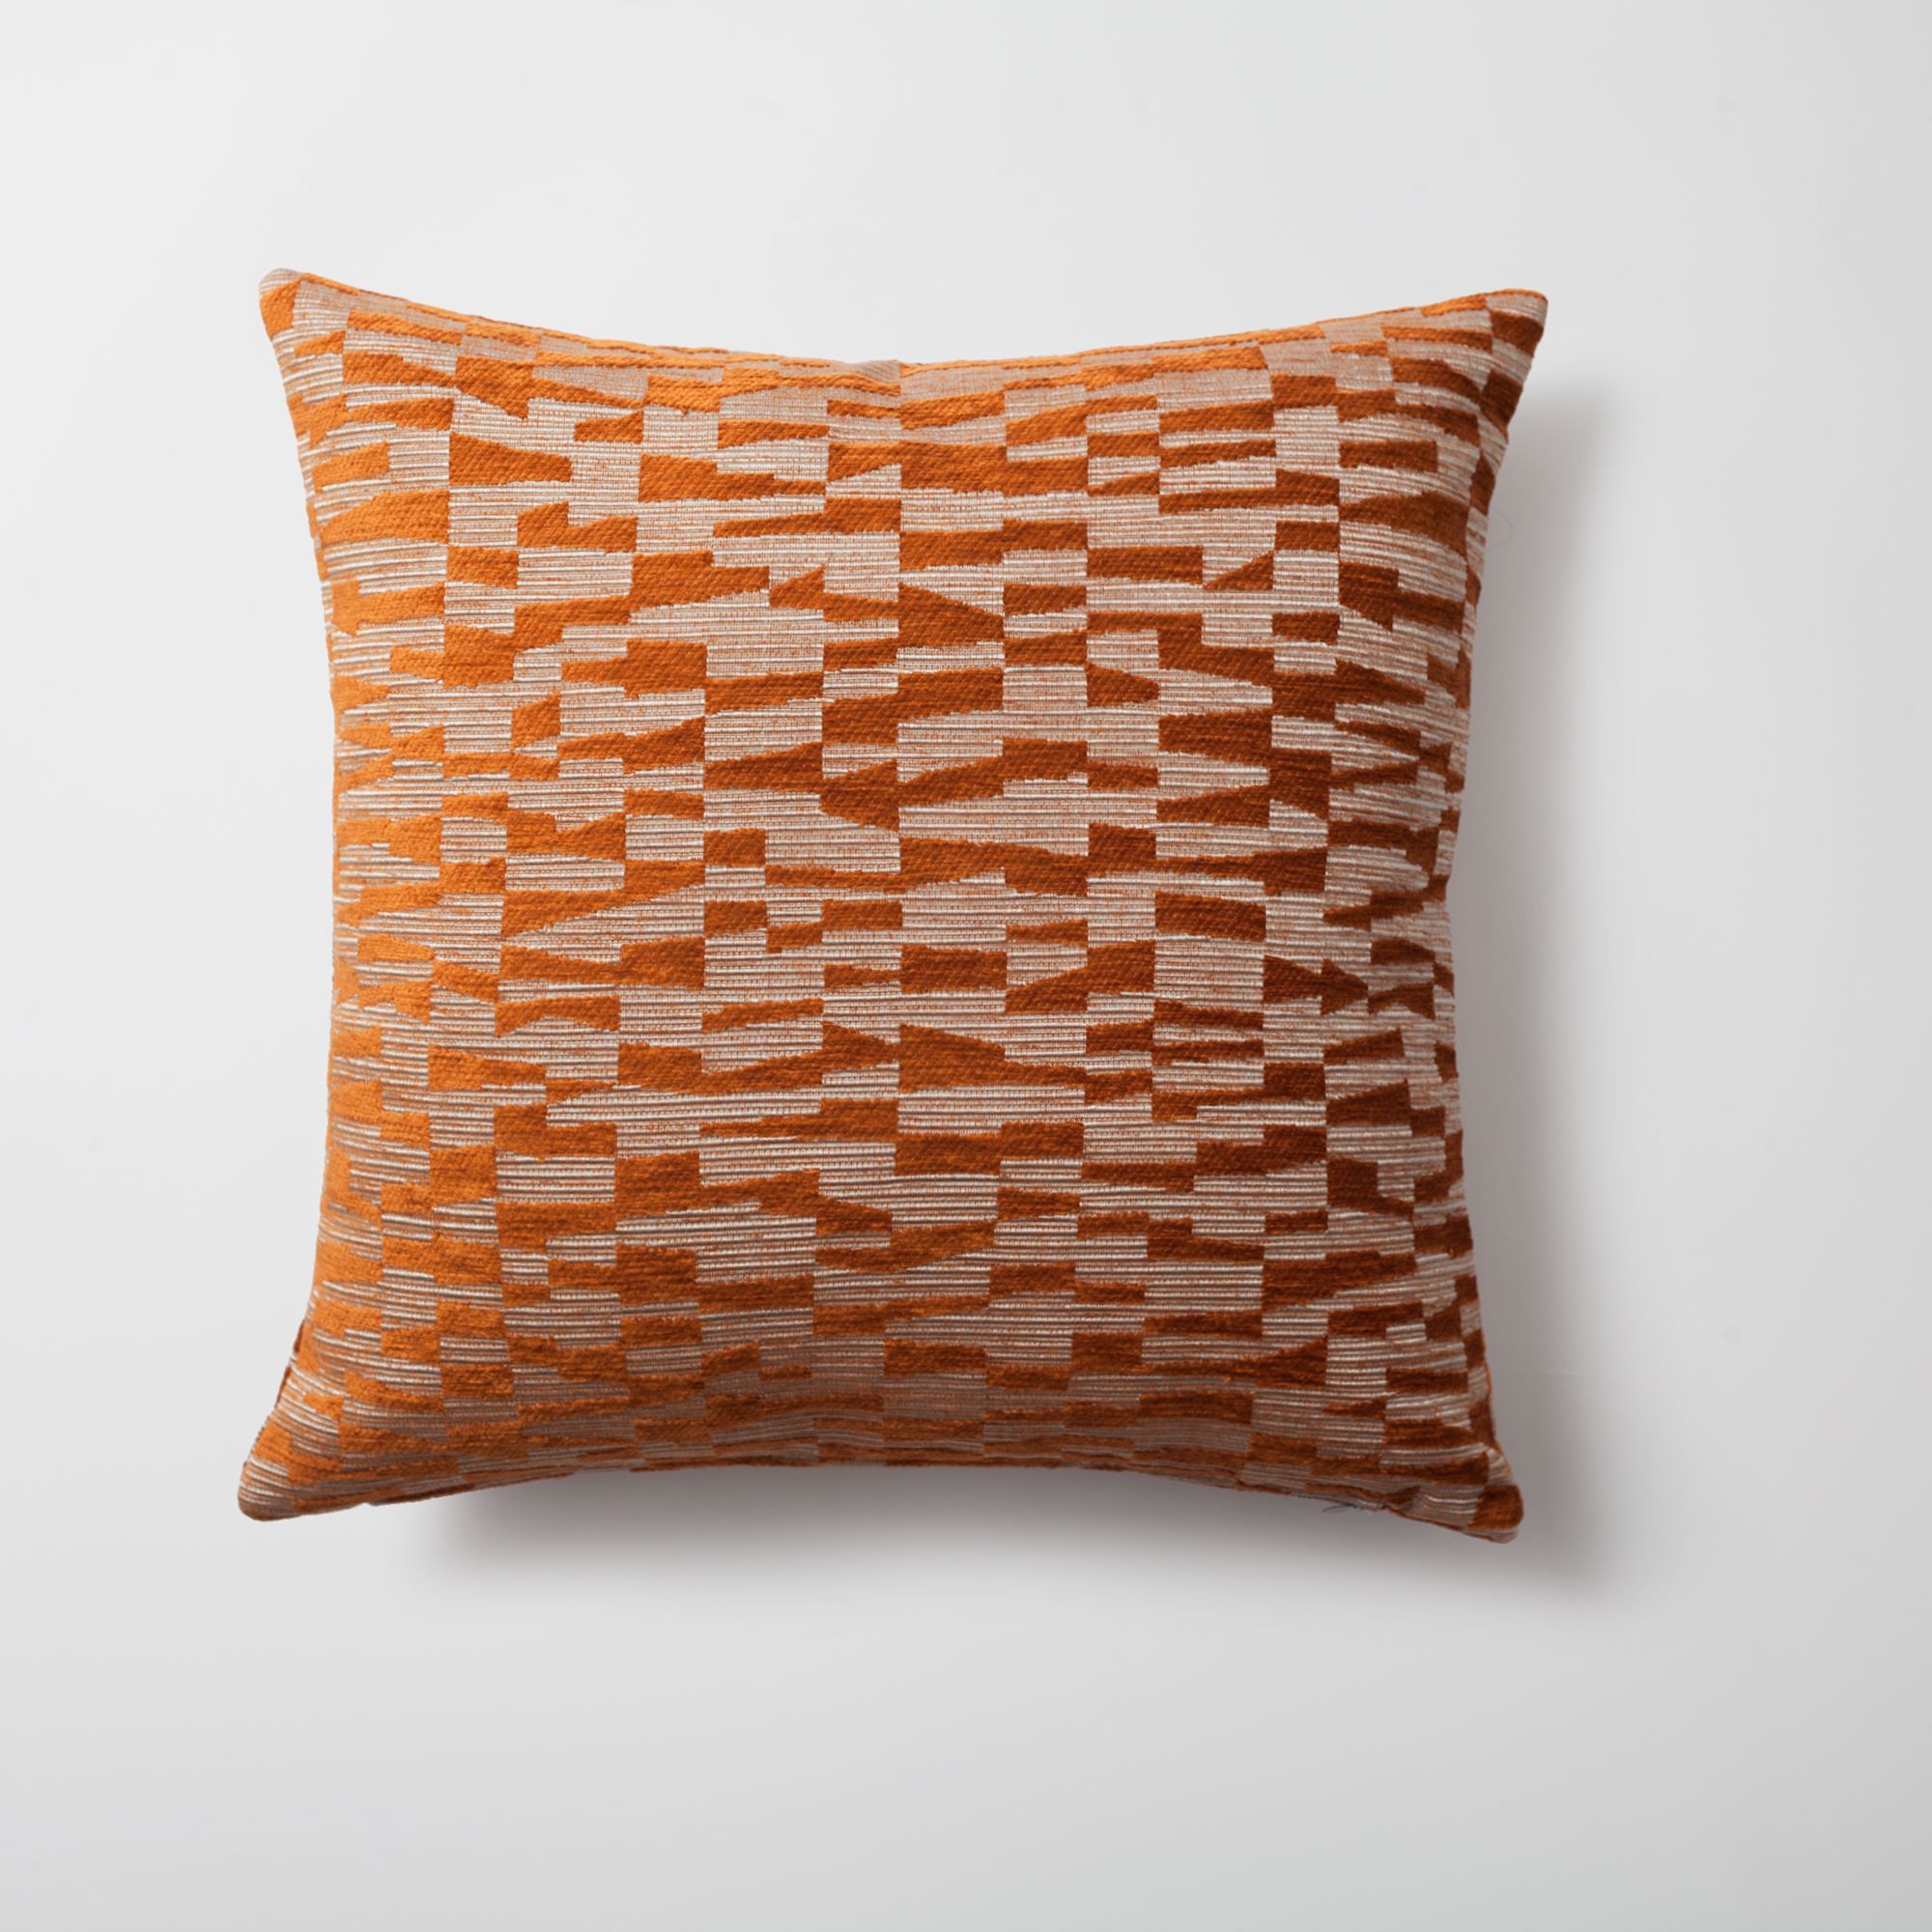 "Bistro" - Geometric Patterned 18x18 Inch Cushion - Orange (Cover Only)